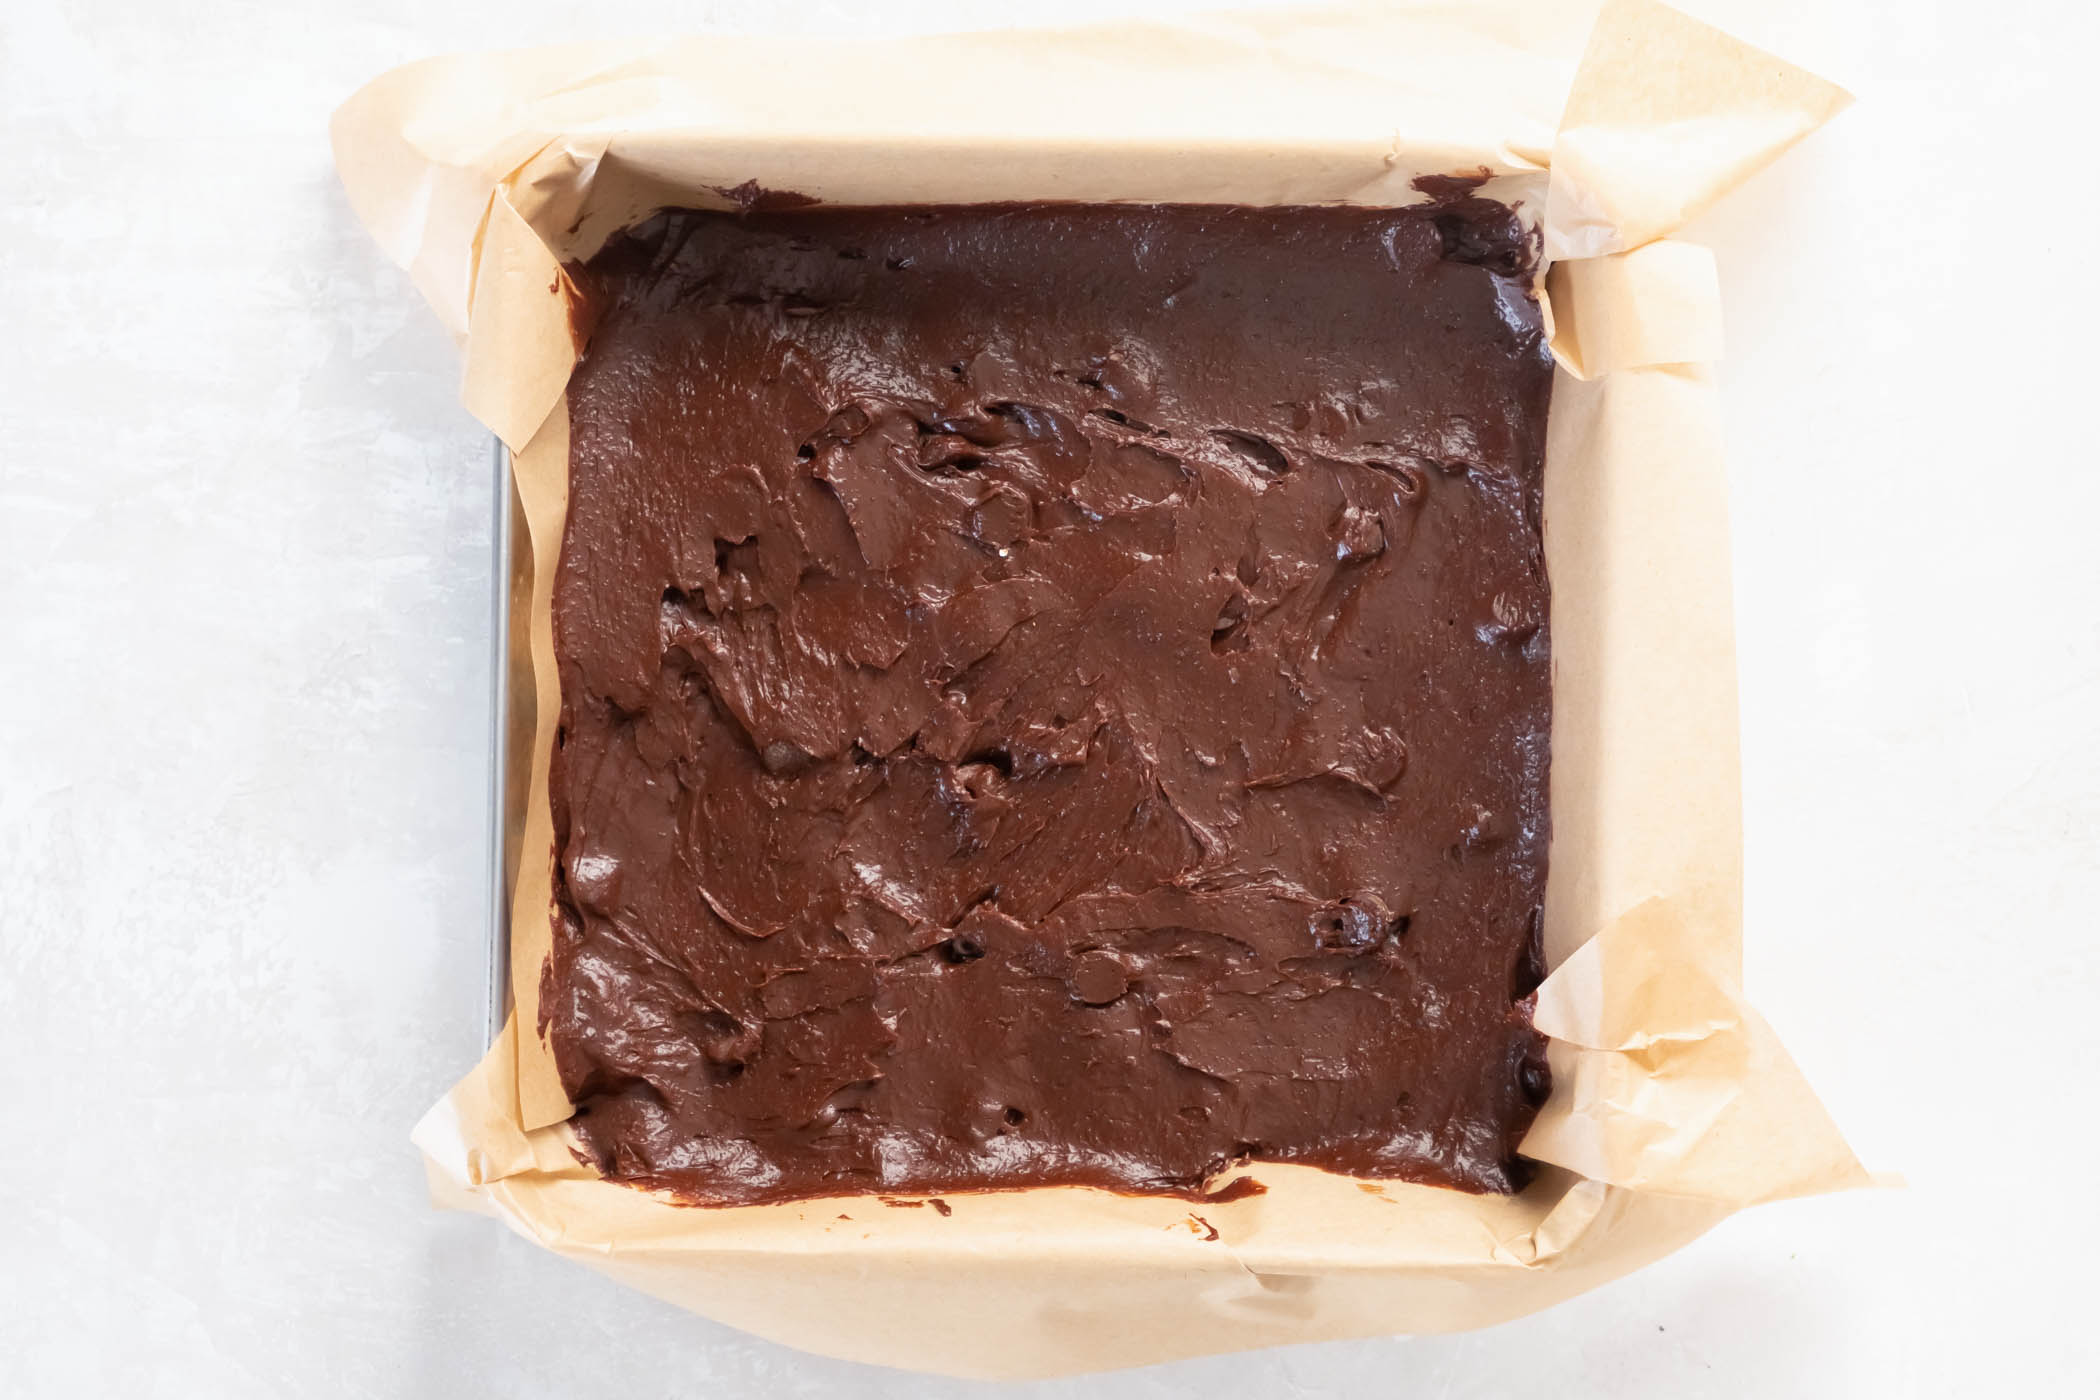 Unbaked brownie batter spread in a metal baking pan lined with parchment paper.